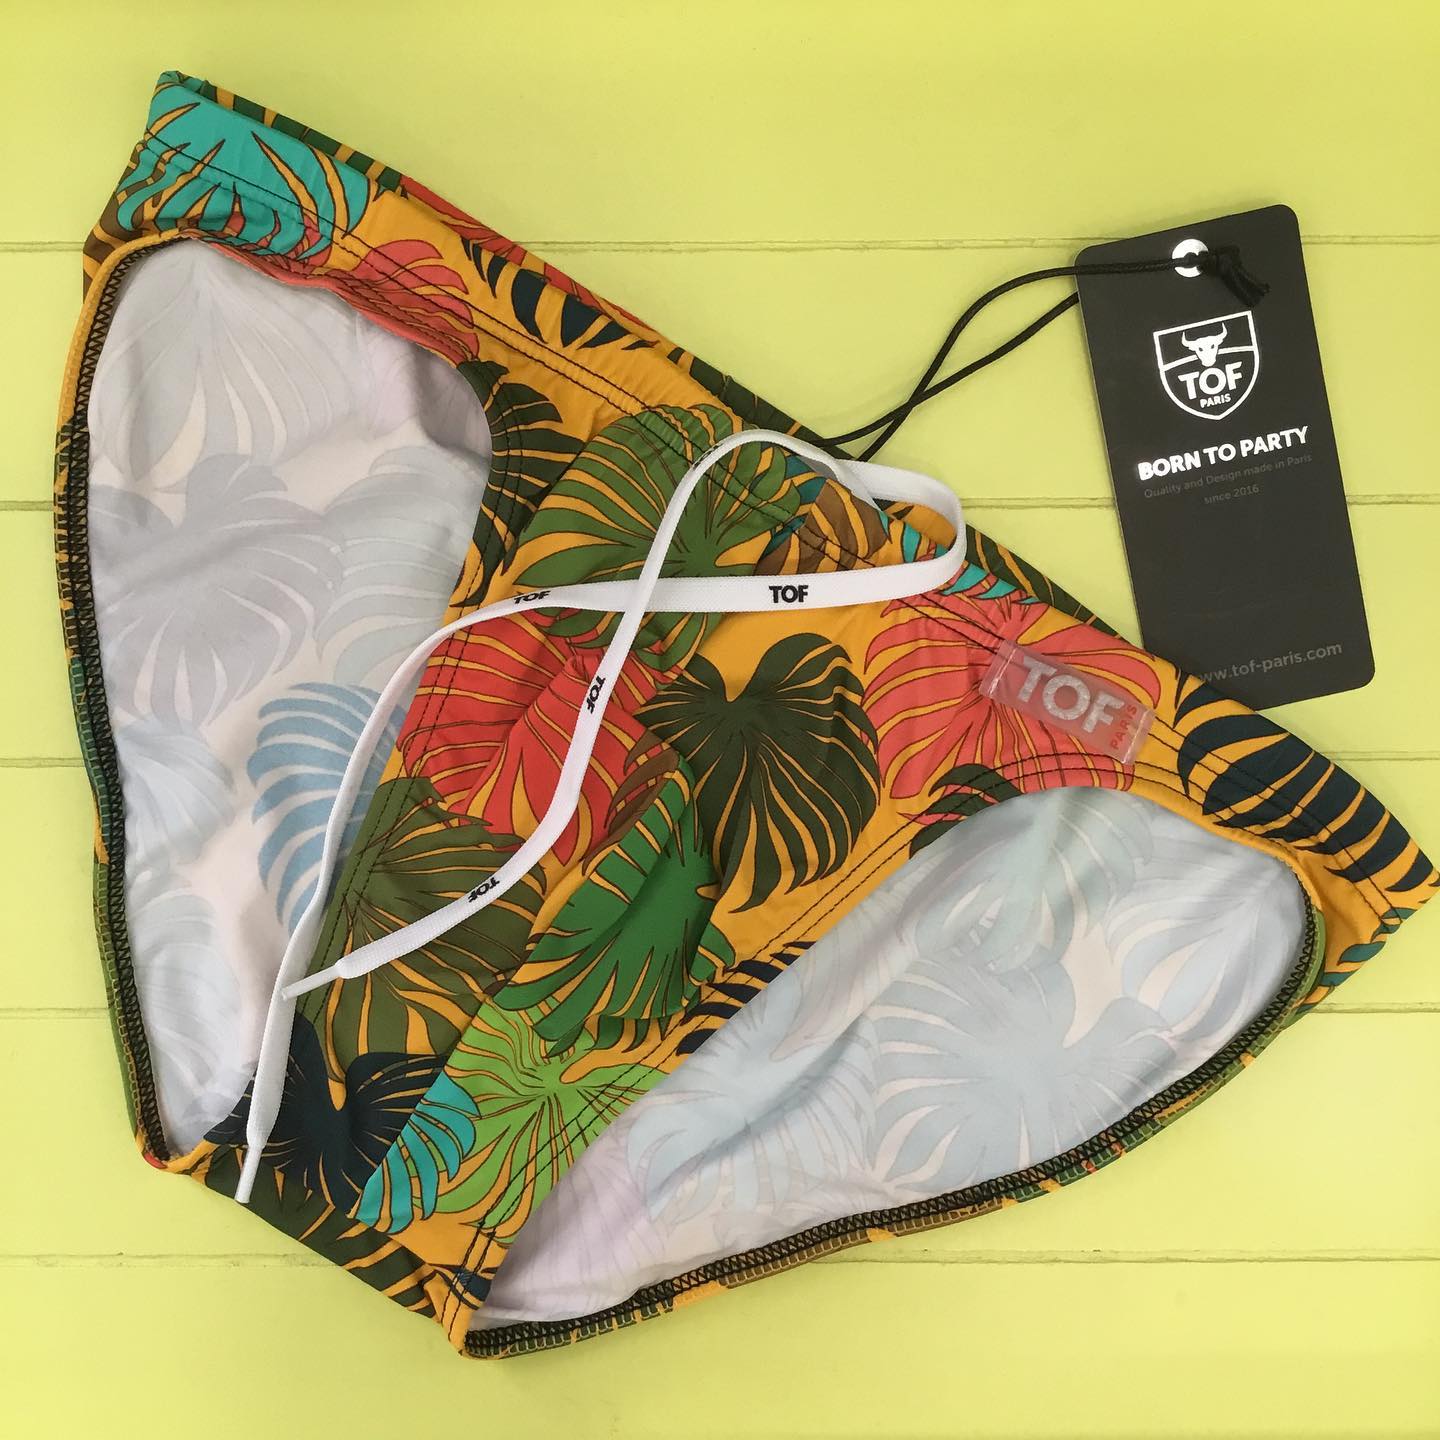 Our swimwear suggestion today is the tropical-style Floral Swim Bikini of TOF Paris in vibrant yellow. Would you wear it?
____
https://www.menandunderwear.com/2022/08/swimwear-suggestion-tof-paris-floral-swim-bikini-yellow.html